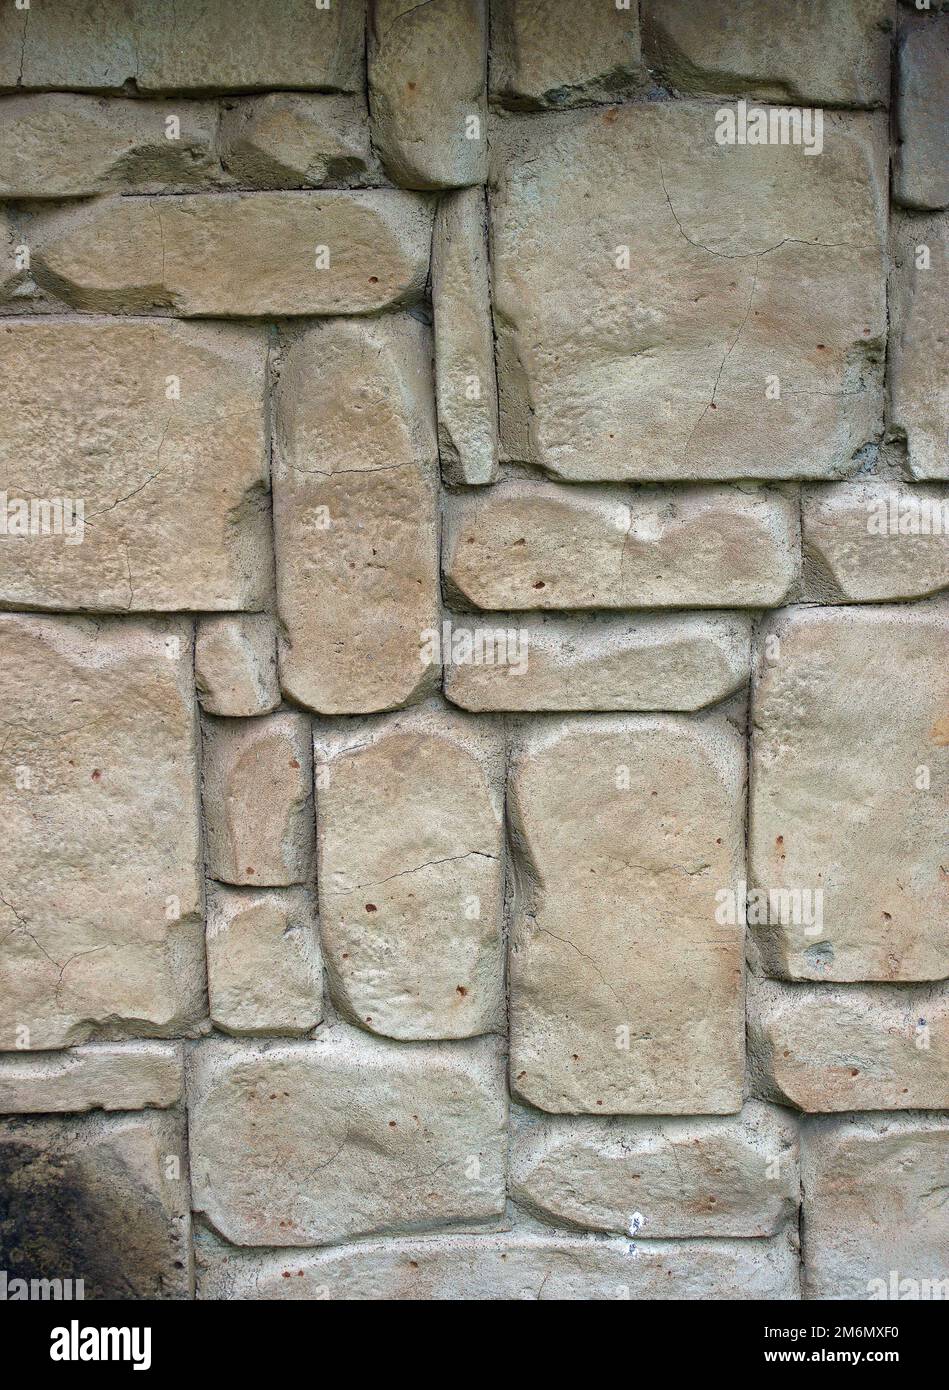 Light brown stones of varying sizes built into a wall, can be used as background Stock Photo